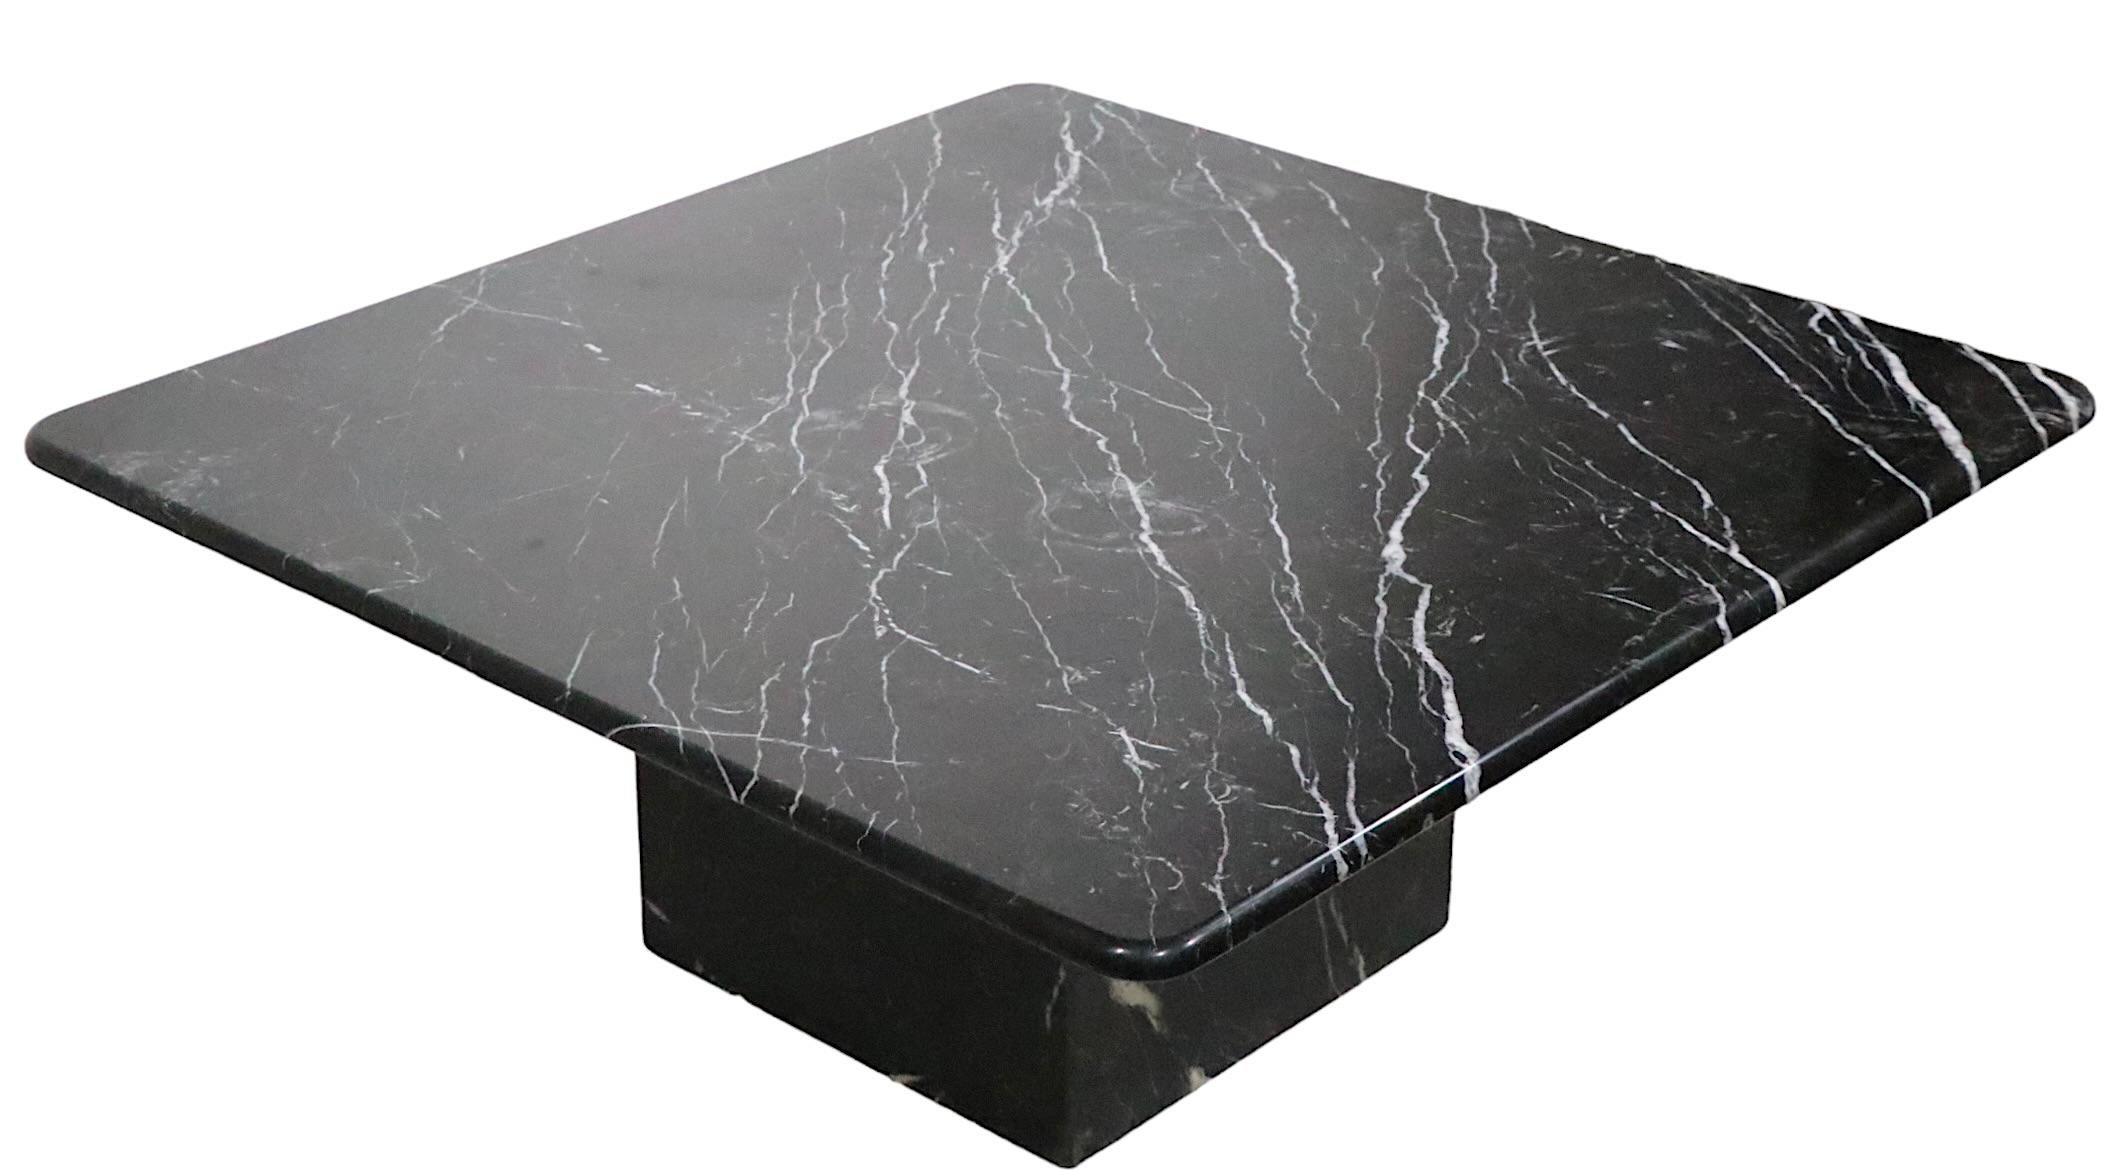 20th Century Post Modern Black Marble Pedestal Base Coffee Table Made in Italy c 1970’s For Sale